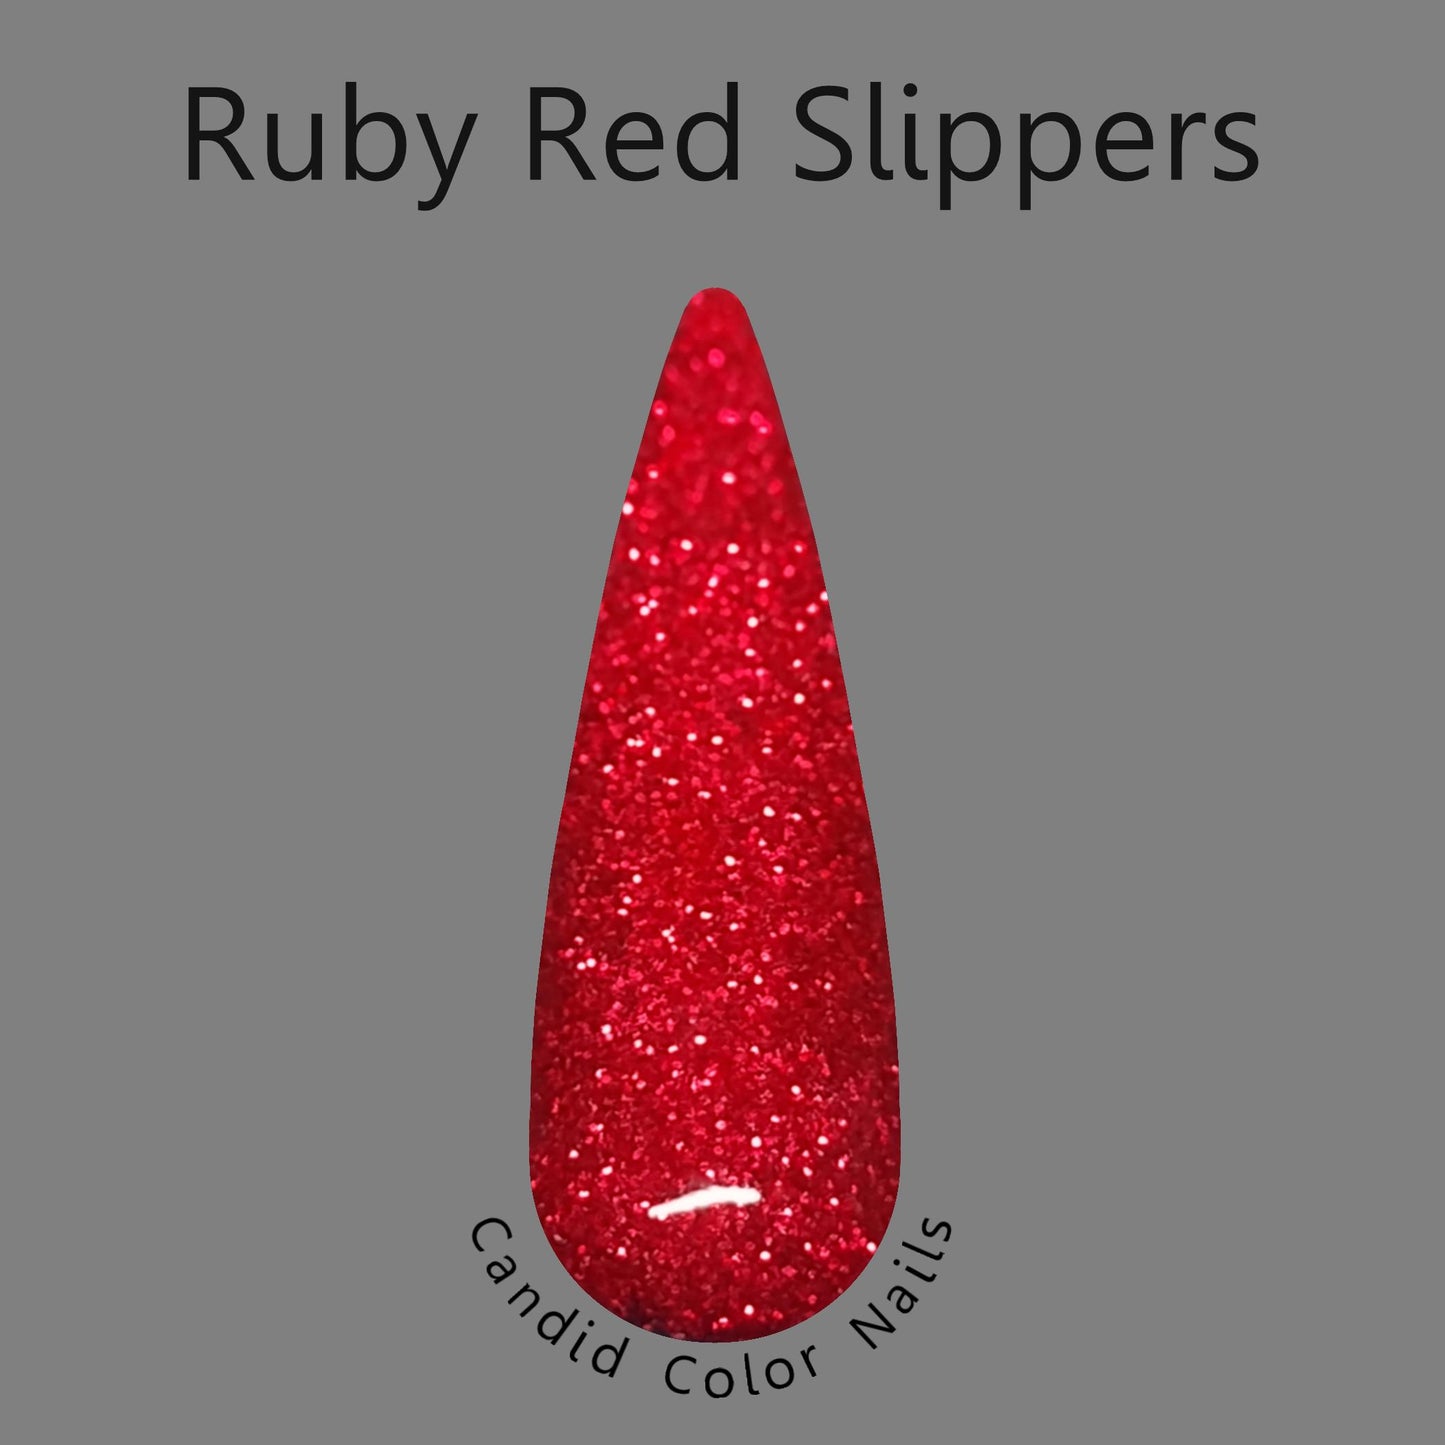 Ruby Red Slippers - Dip Powder